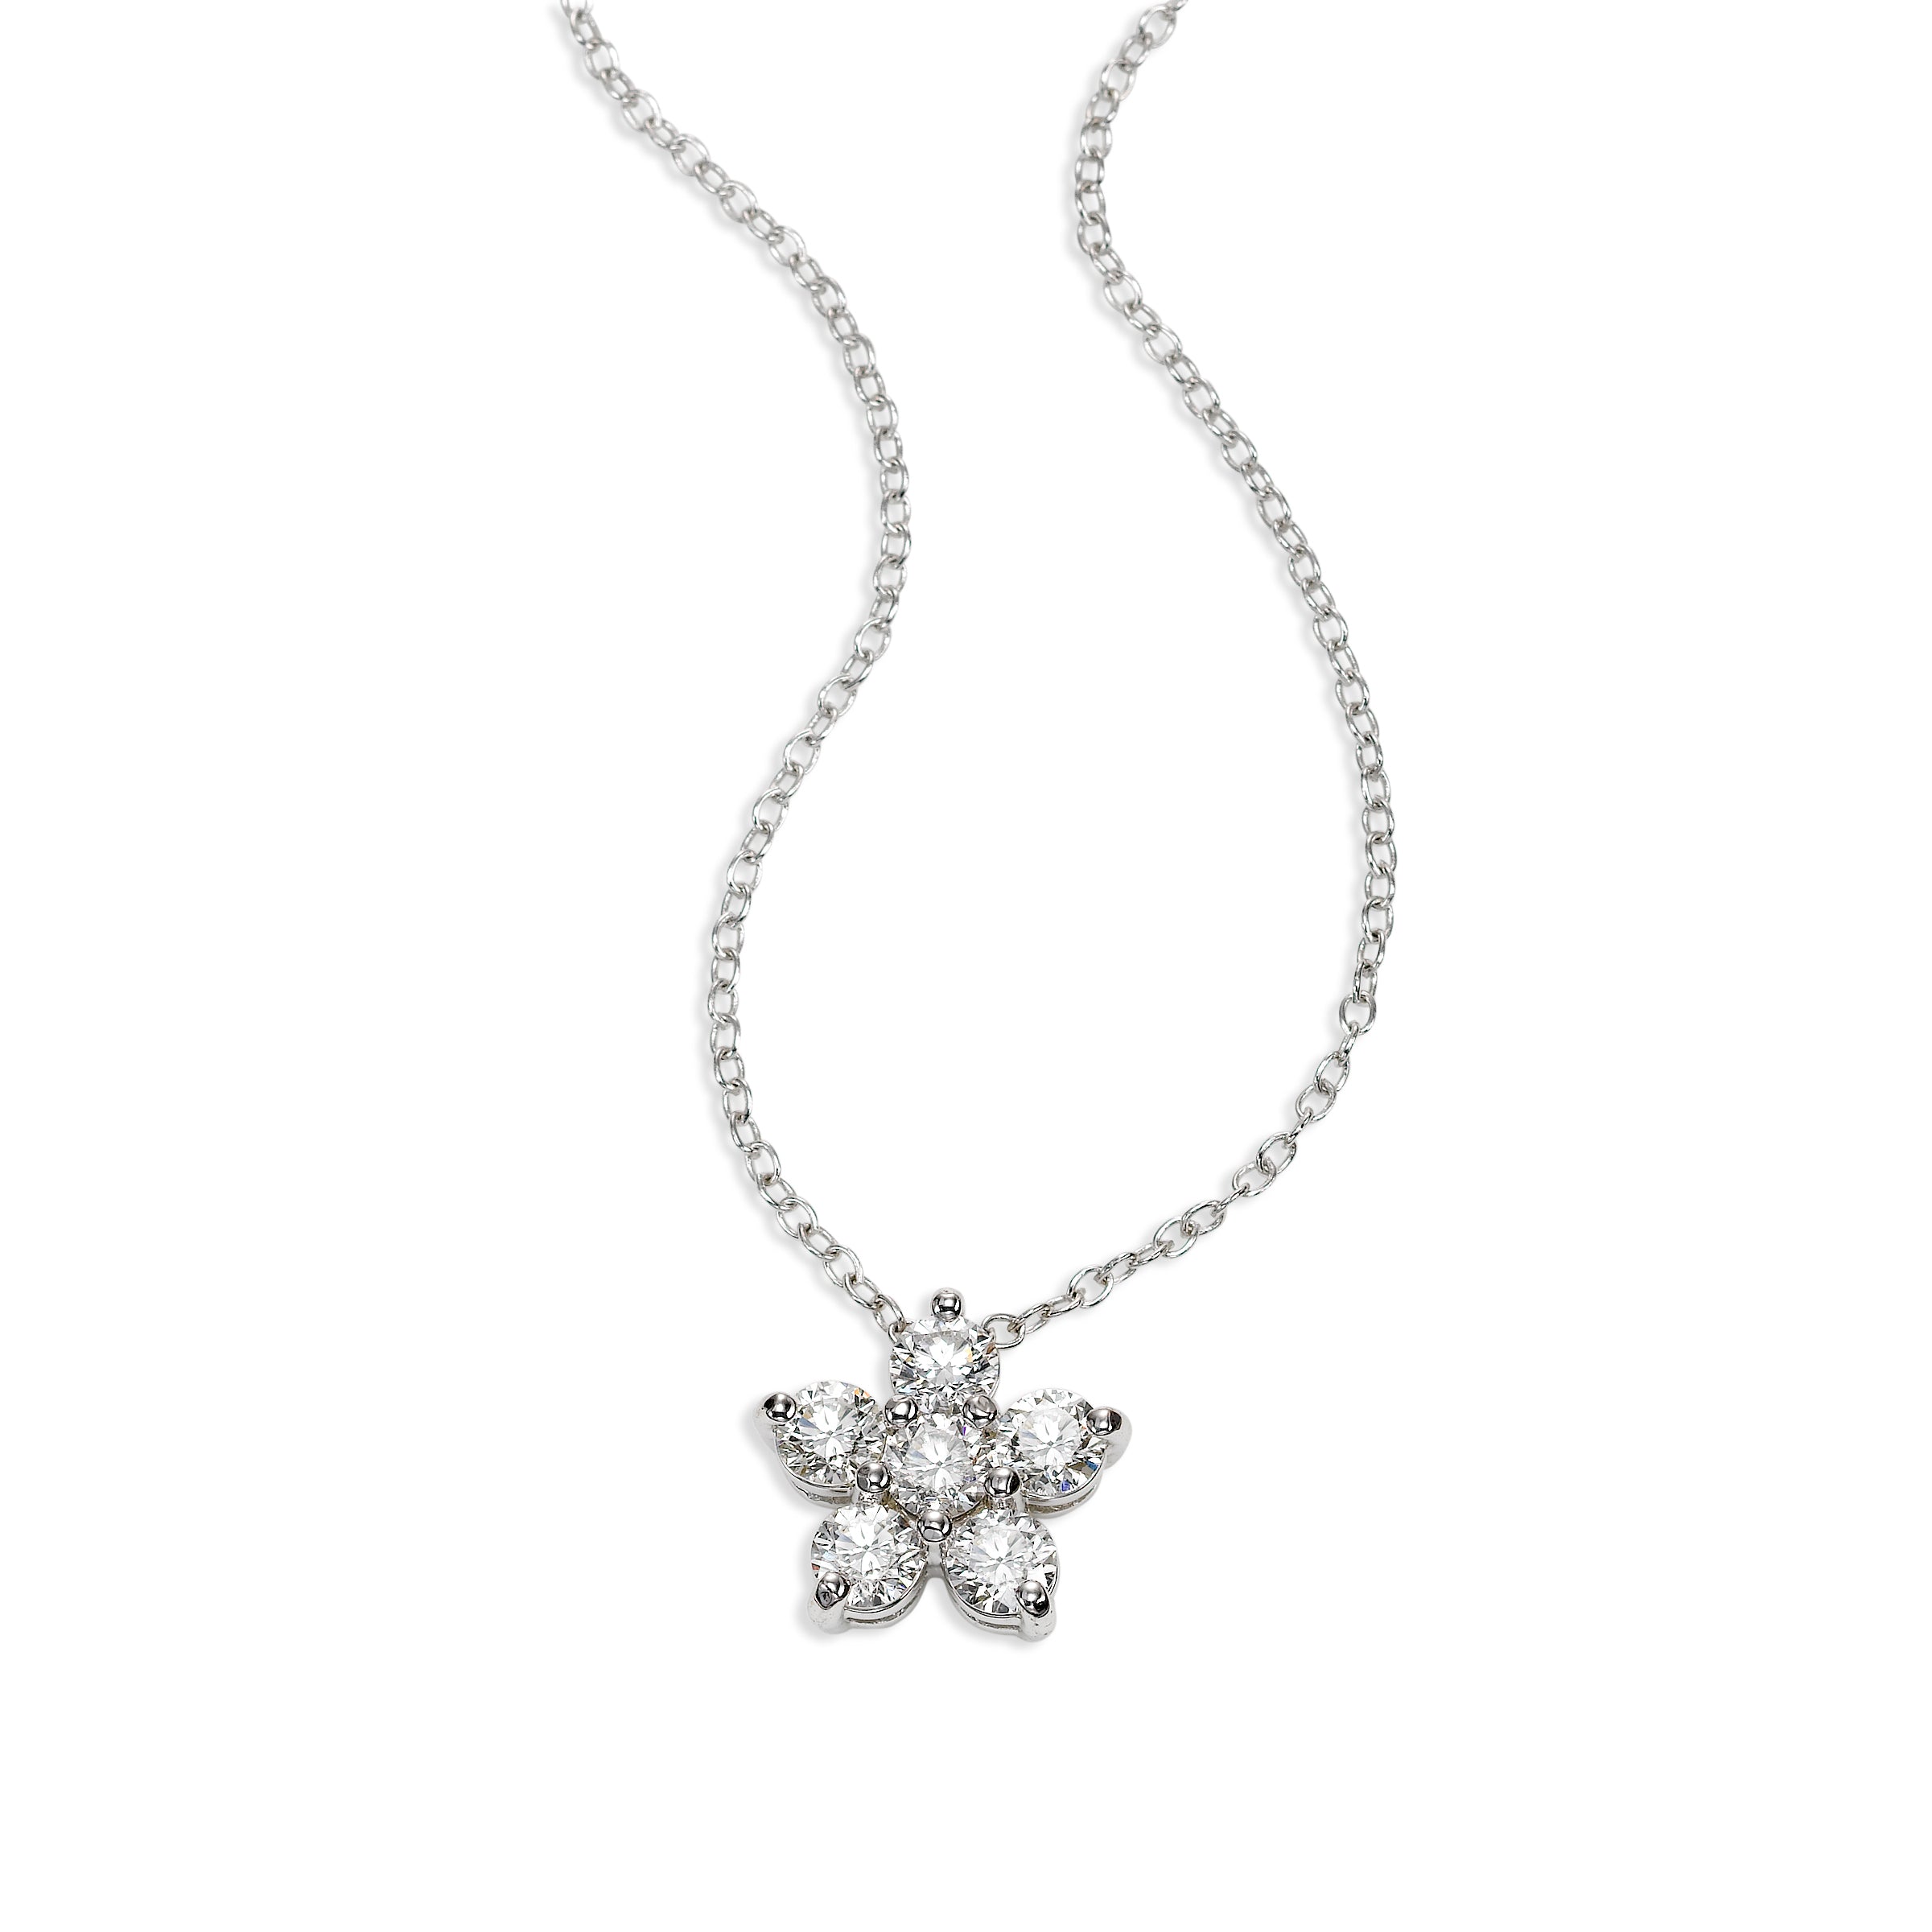 Diamond Clover Necklace in 14K White Gold with 44 Diamonds Weighing .42ct tw